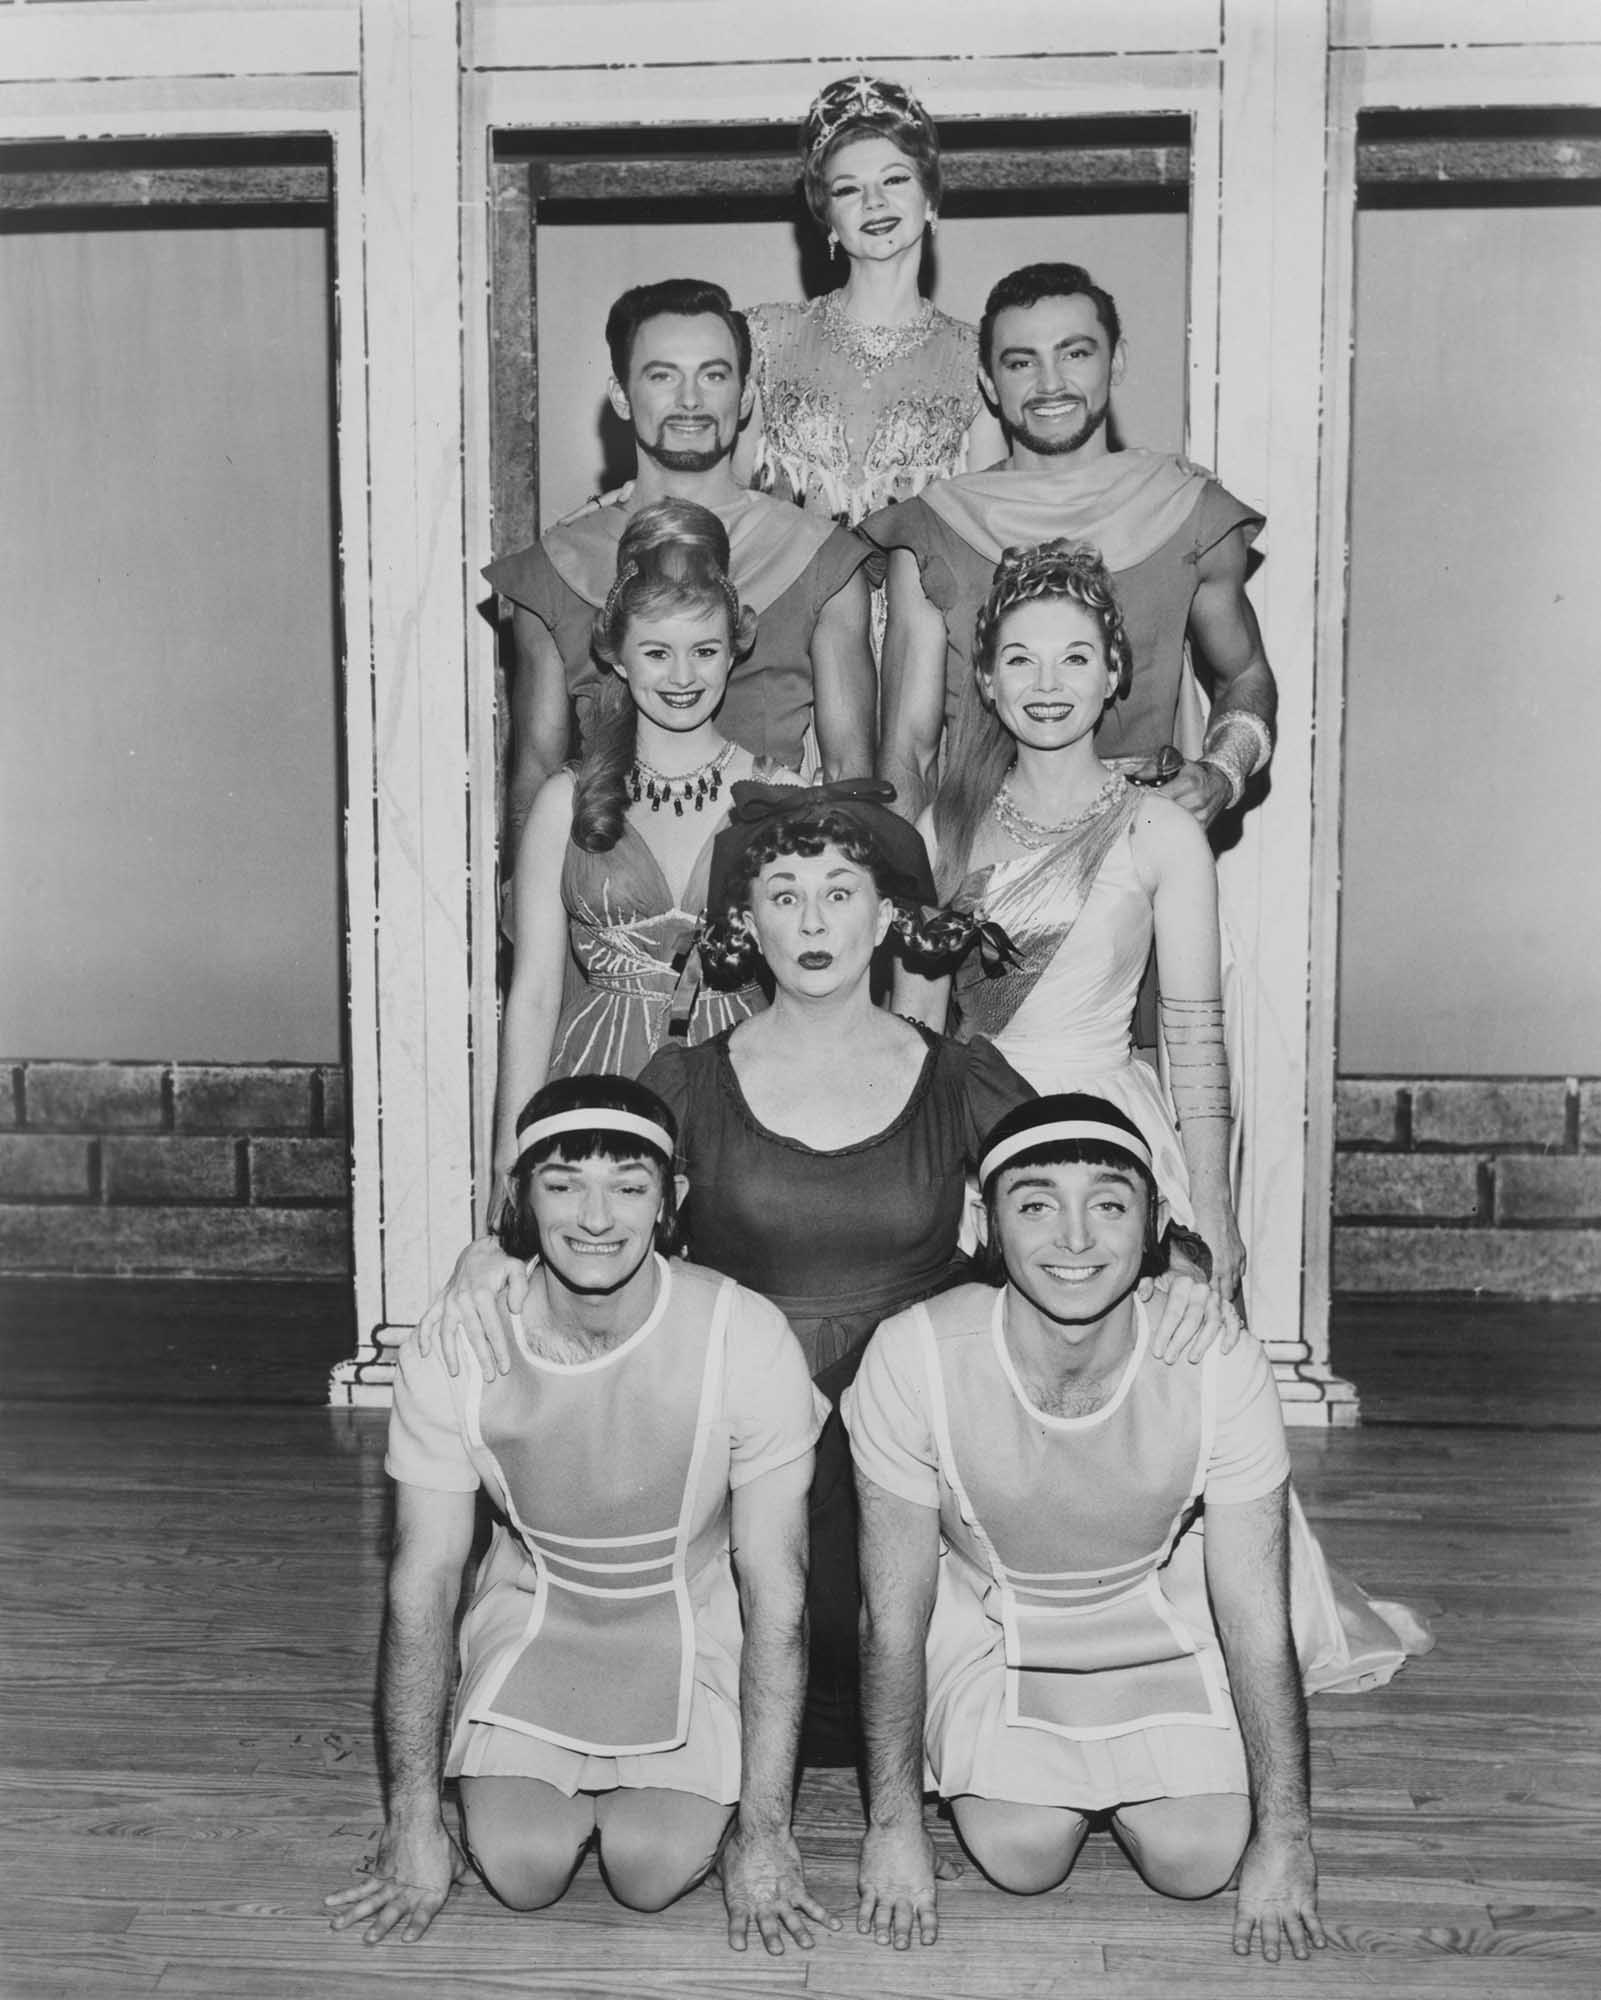 A photo from the 1963 off-Broadway production of The Boys from Syracuse.